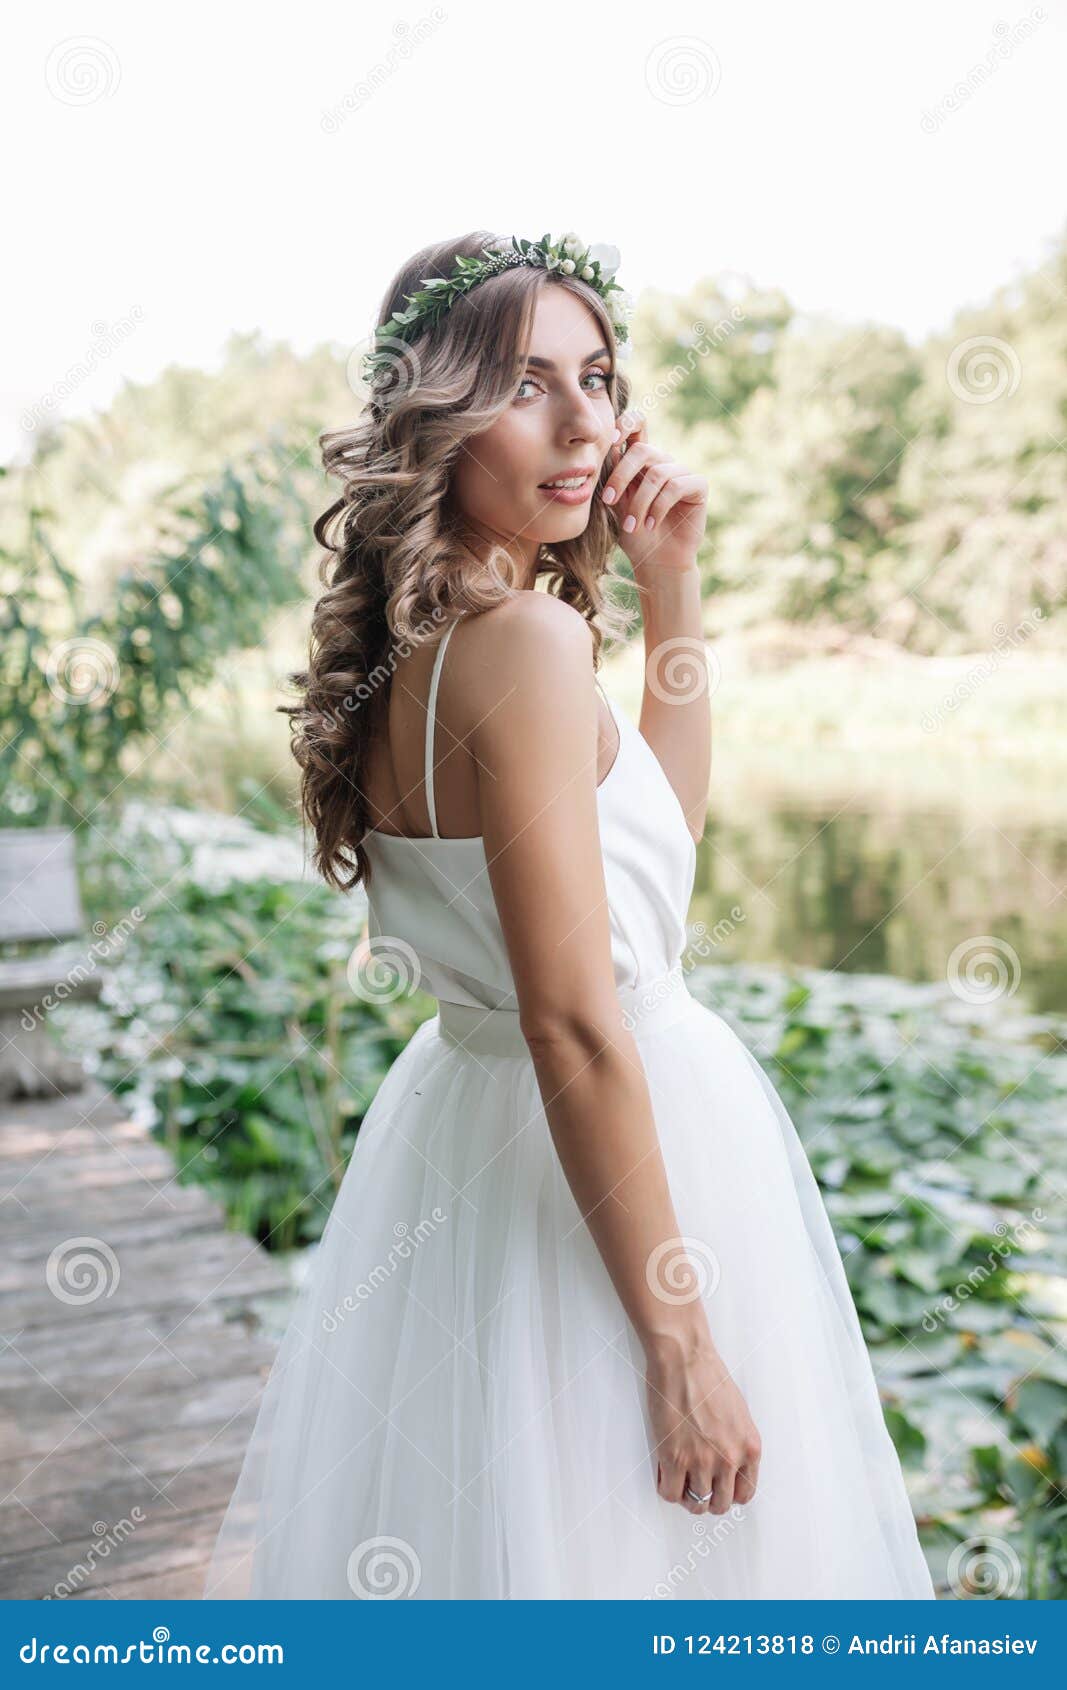 Images Pose young woman Hands gown 1600x1200